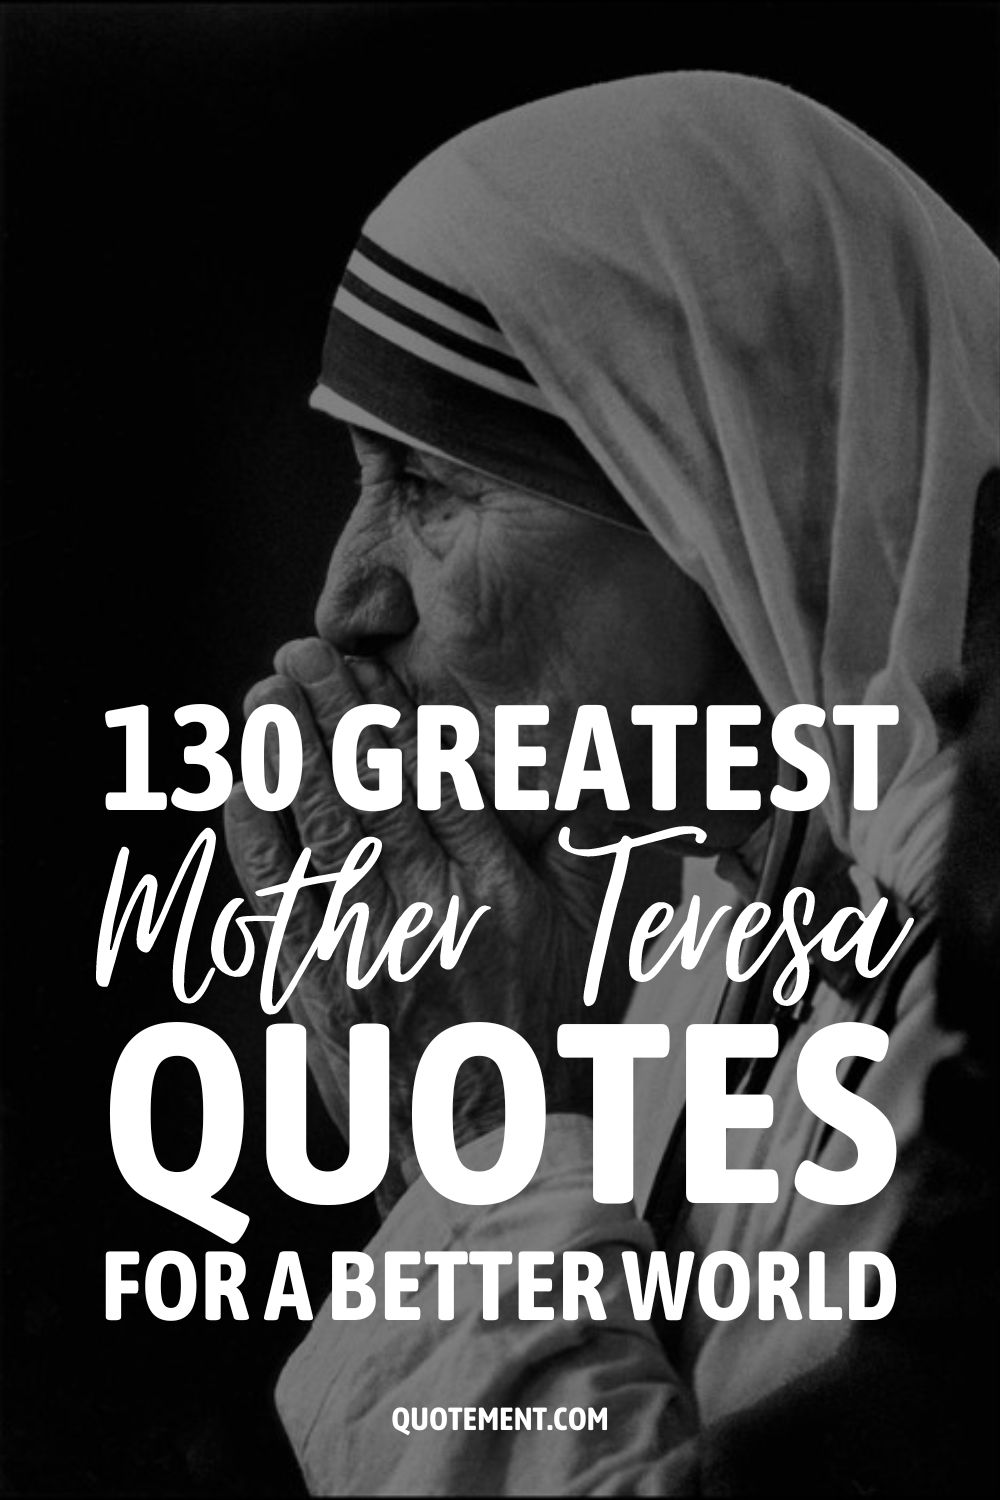 130 Greatest Mother Teresa Quotes For A Better World
